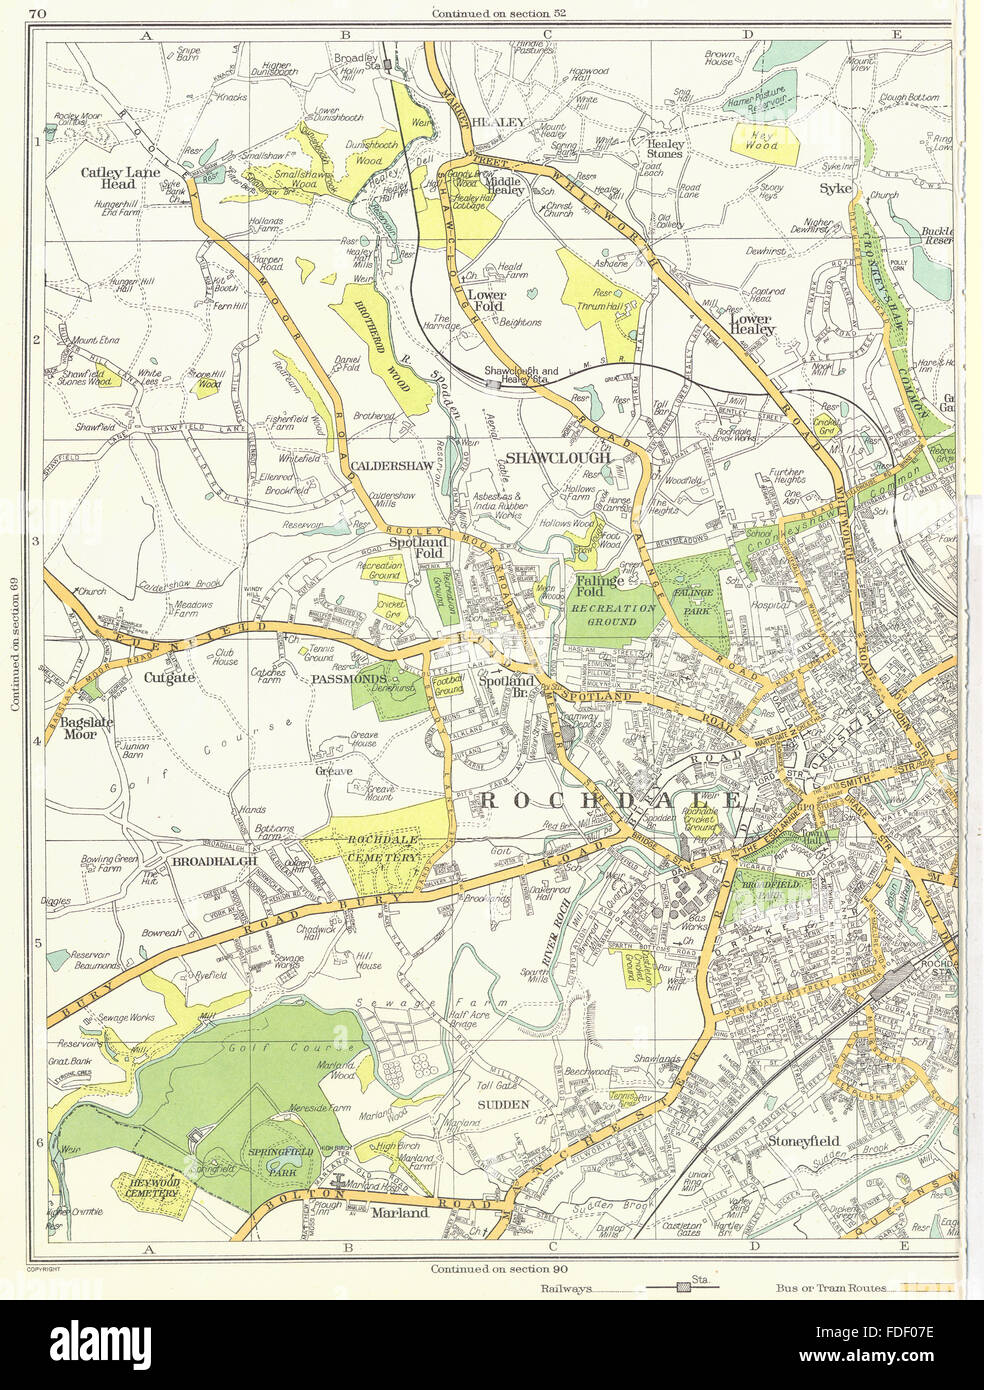 ROCHDALE Shawclough Marland Stoneyfield Broadhalgh Caldershaw 1935 old map Stock Photo